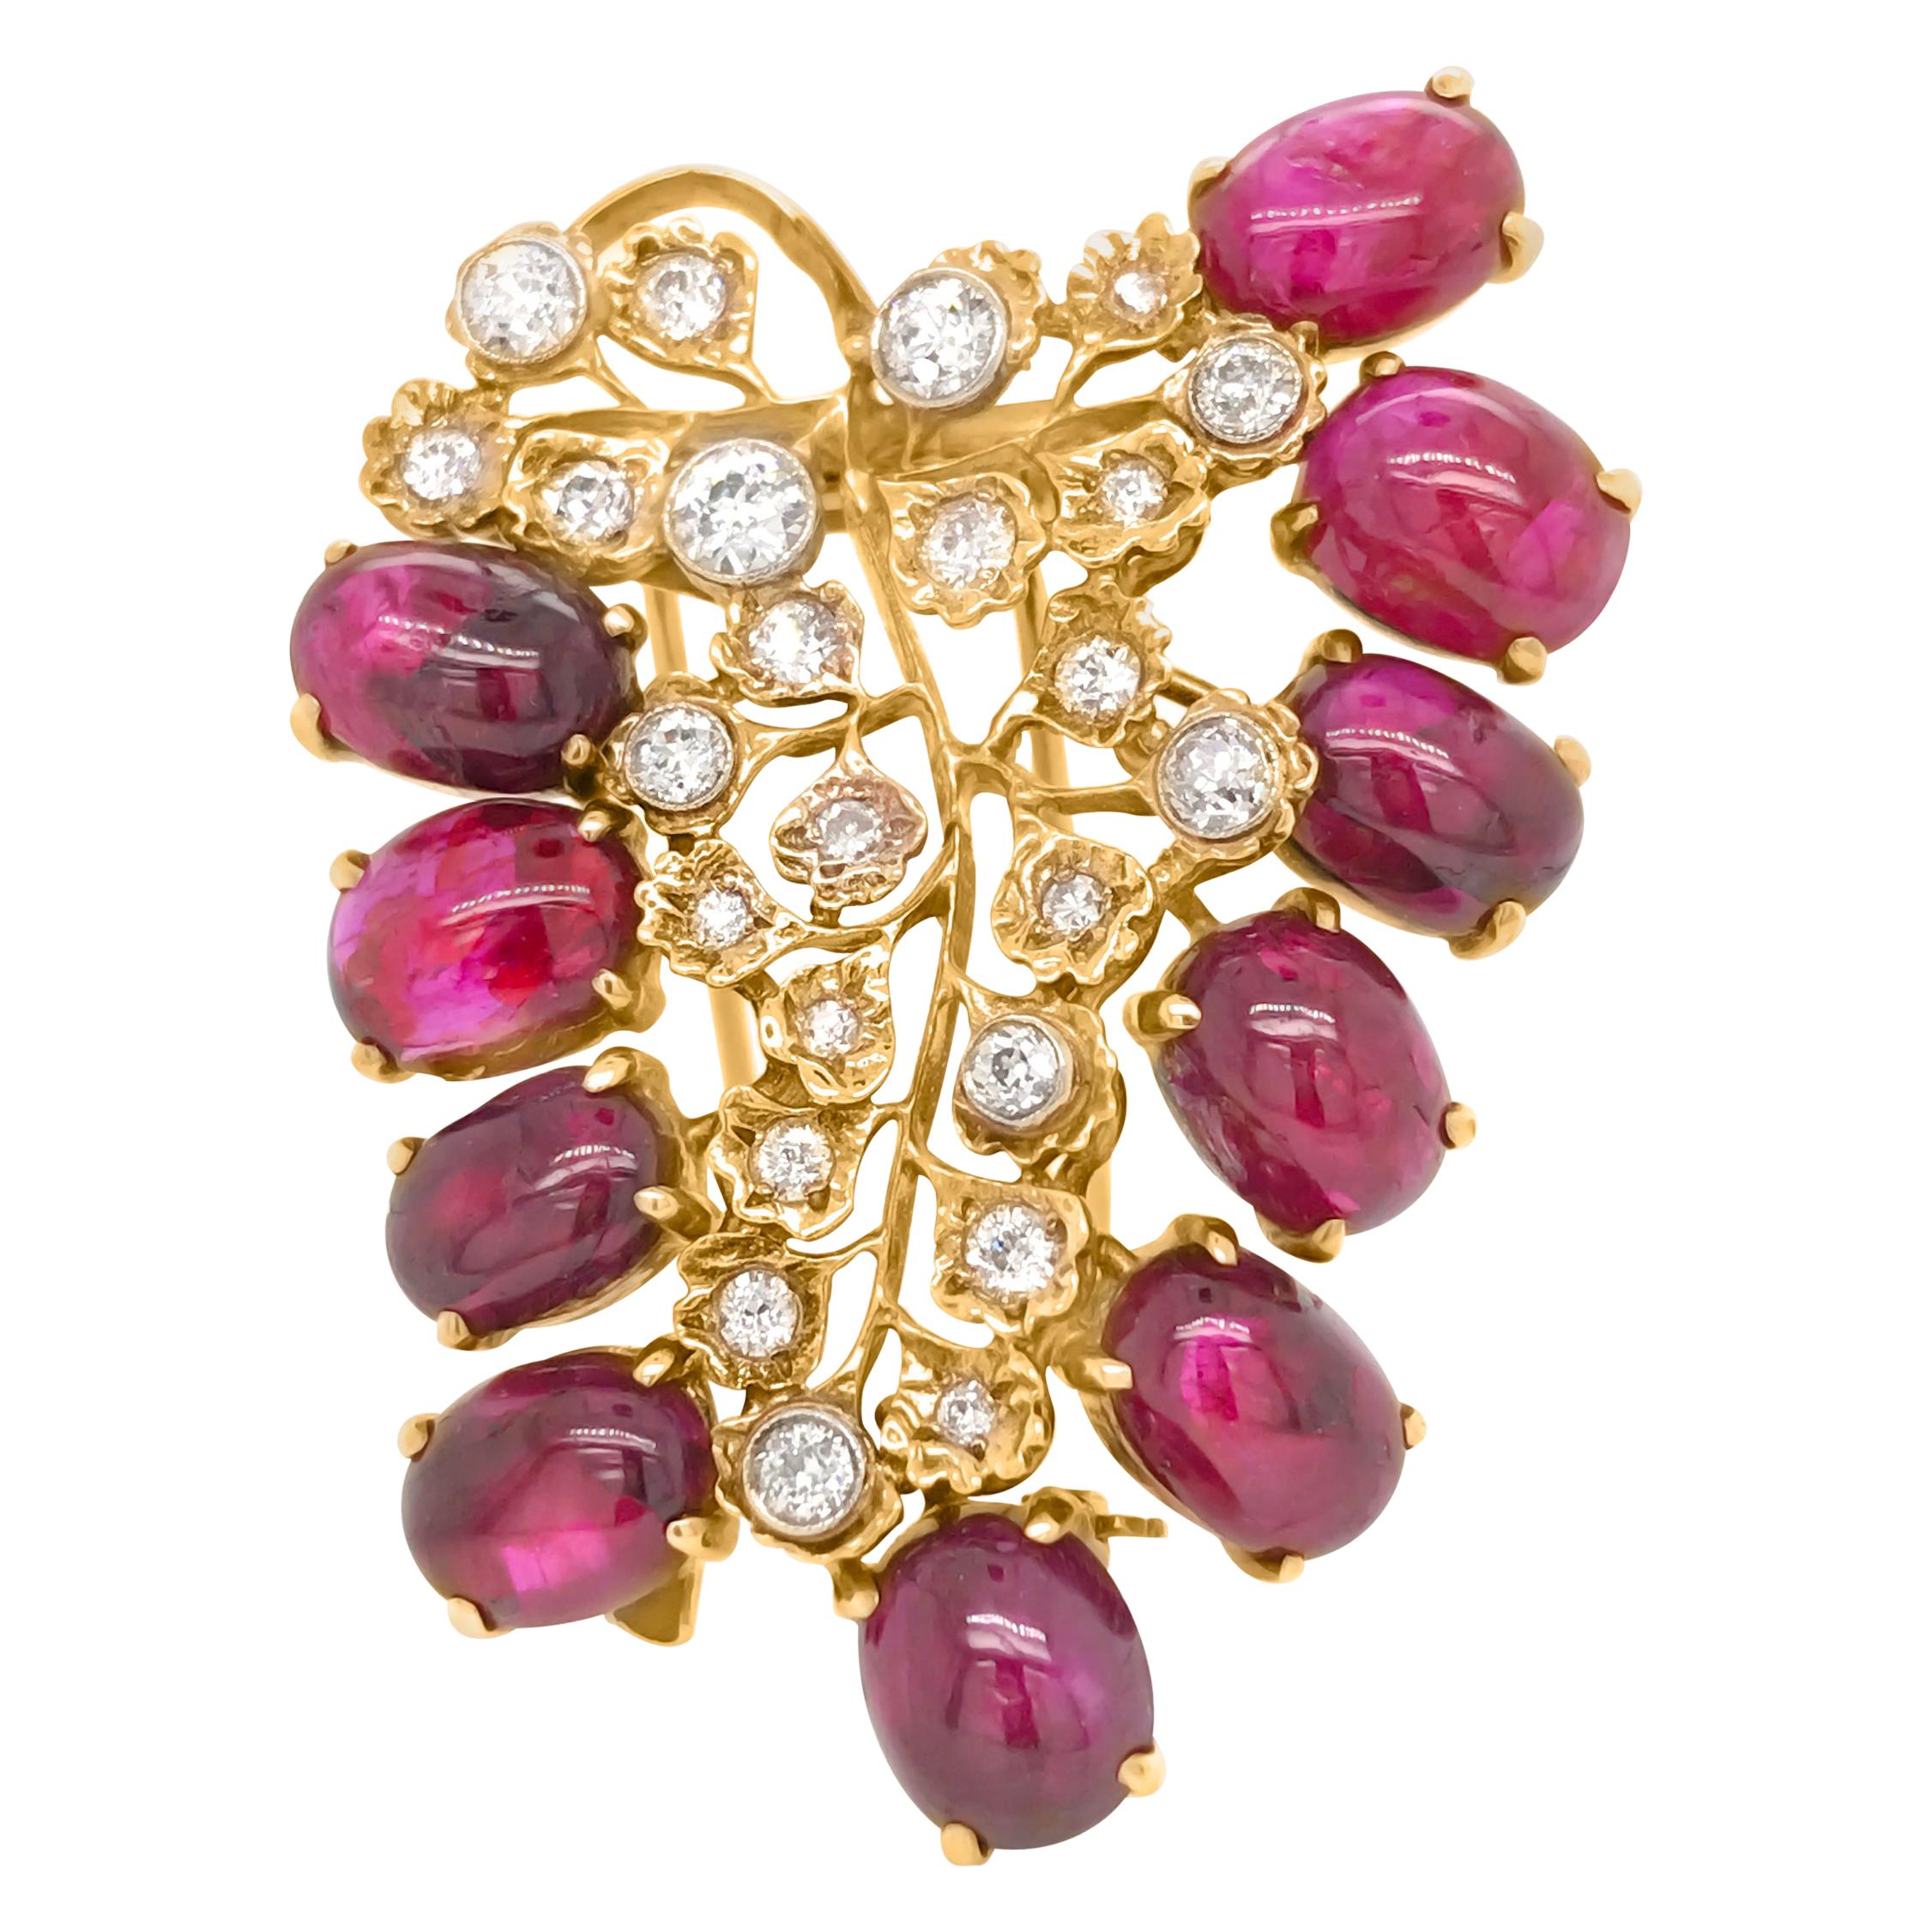 Cabochon Ruby and Diamond Brooch